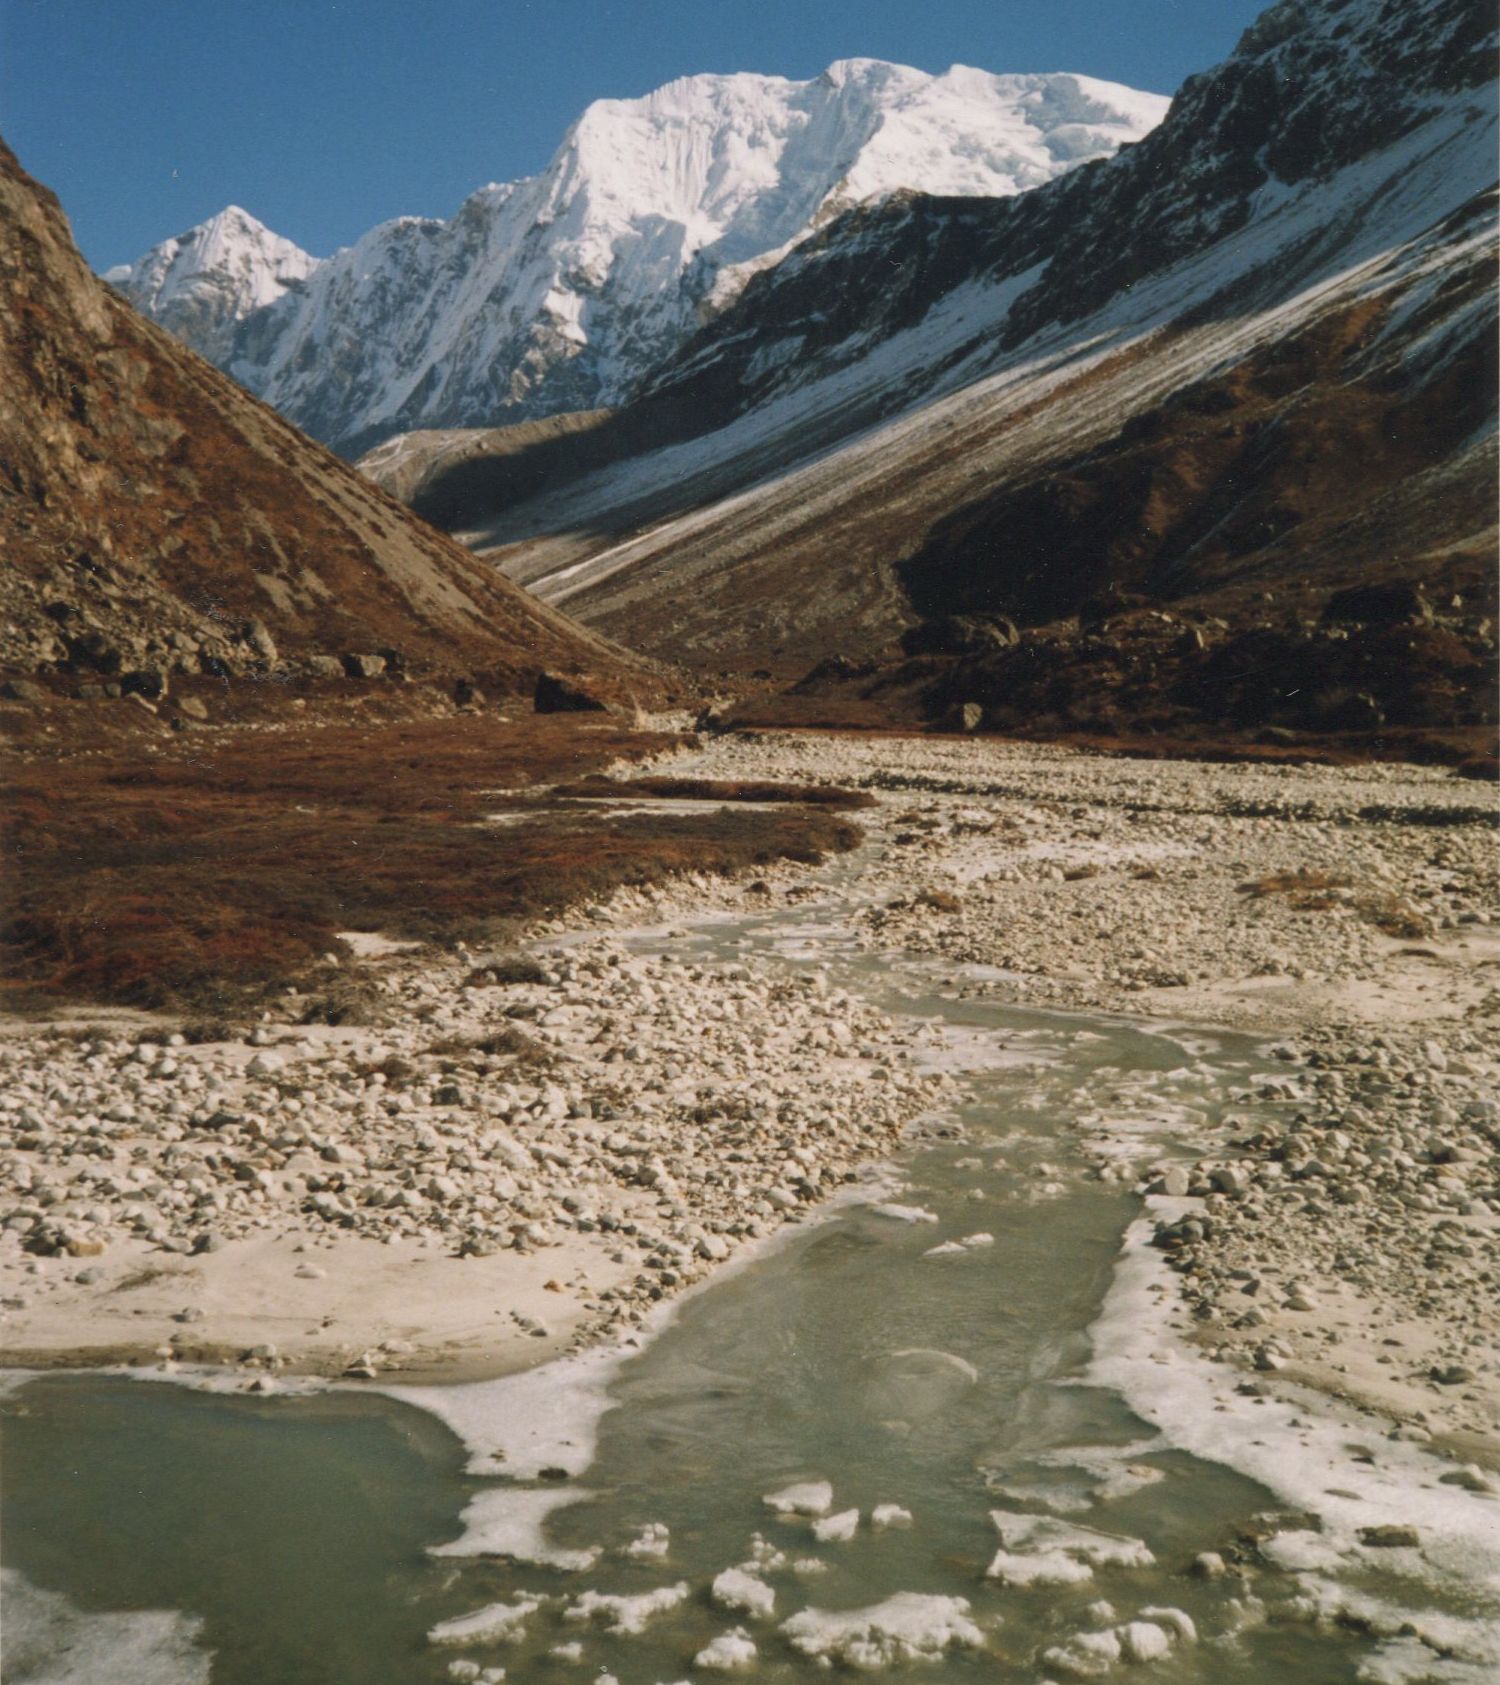 Dome Blanc from Langshisa Kharka in the Langtang Valley